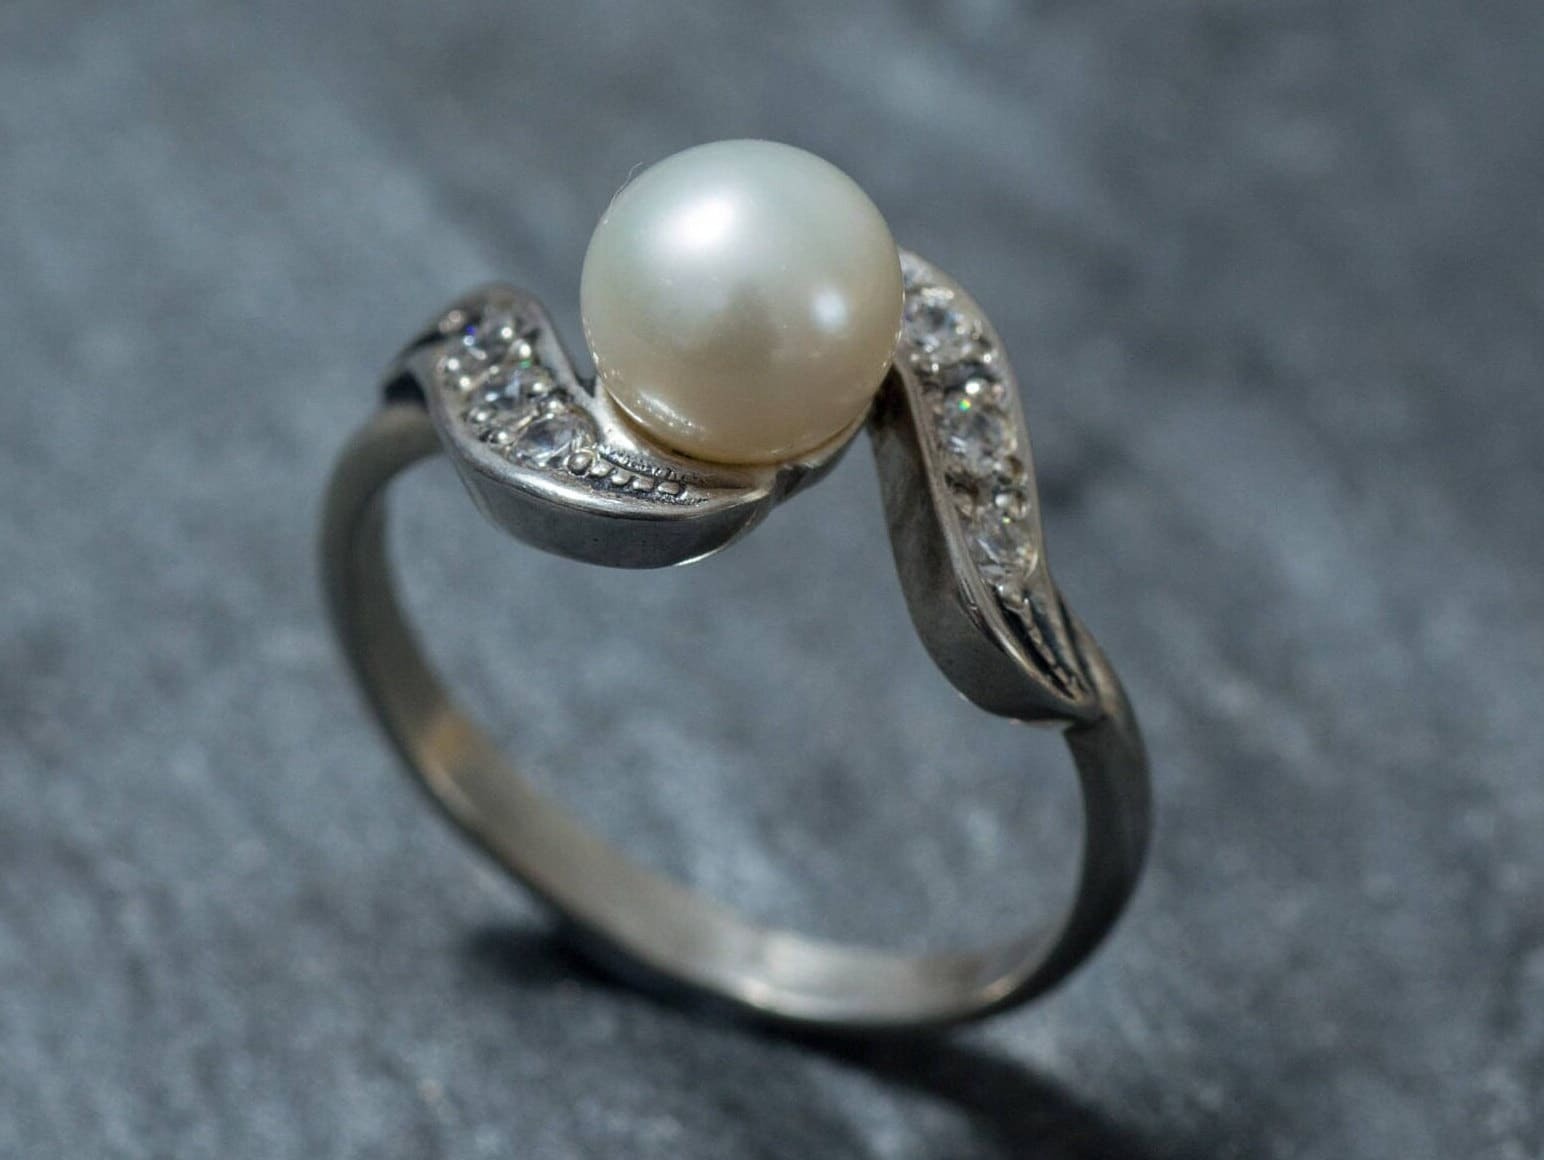 Vintage Pearl Ring, White Pearl Ring, Natural Pearl Ring, White Pearl, Vintage Rings, June Birthstone Ring, June Ring, Solid Silver Ring